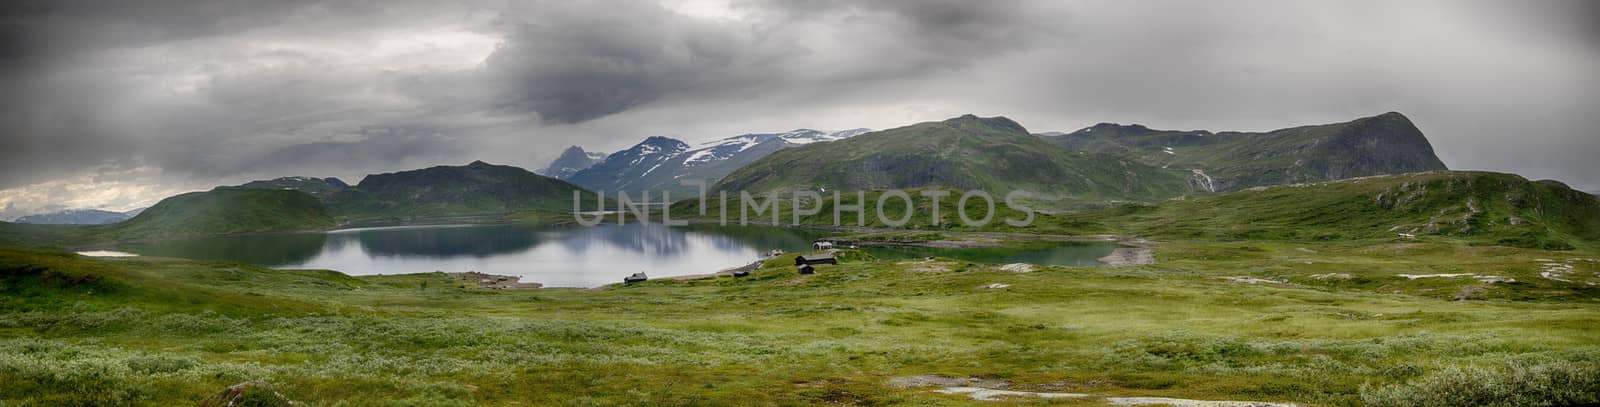 Beautiful mountain landscape panorama with lake and clouds by javax